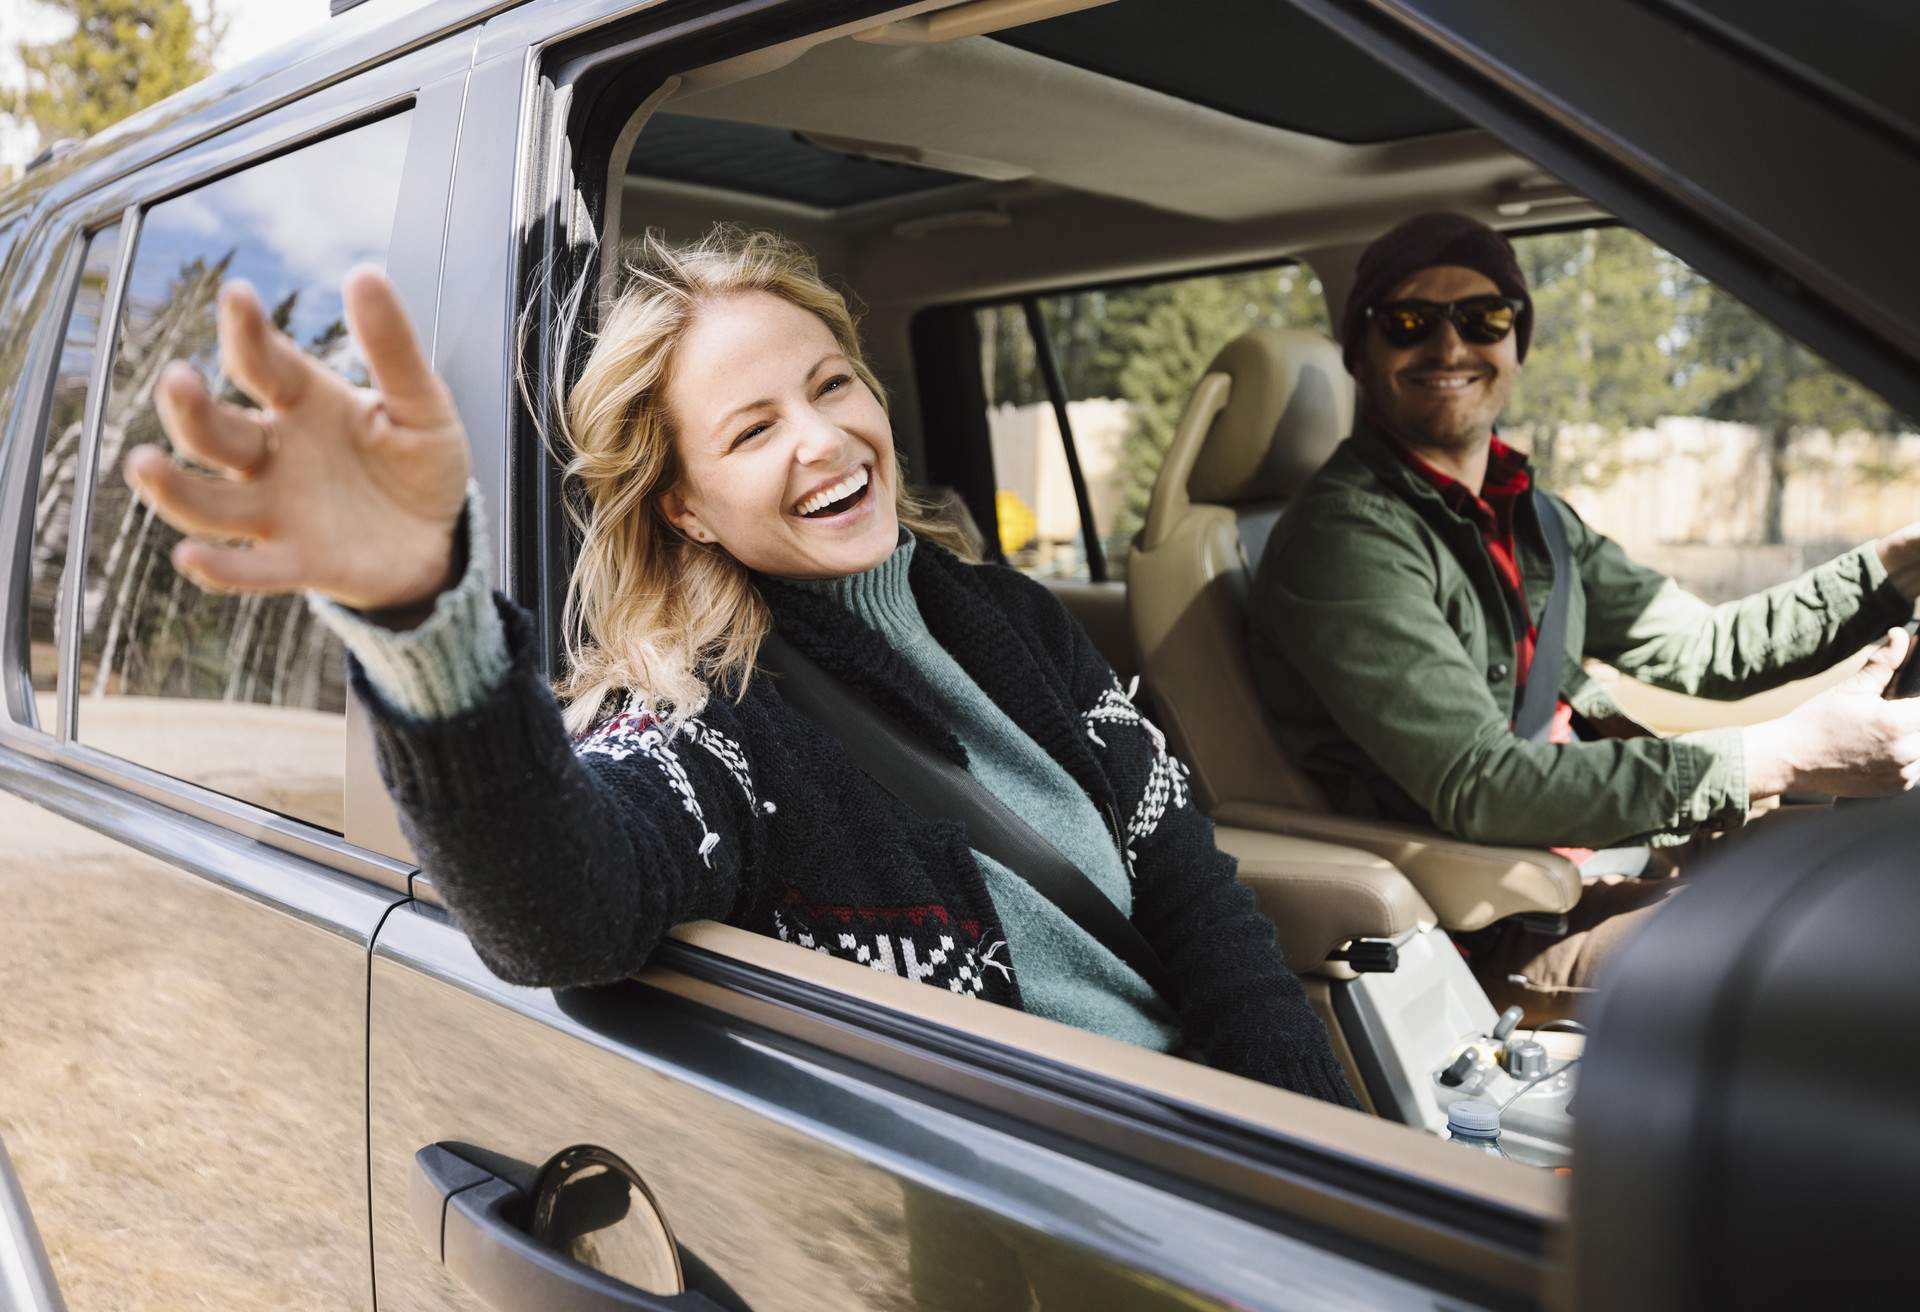 theme_car_couple_woman_happy_gettyimages-1149890083_universal_within-usage-period_59488-1